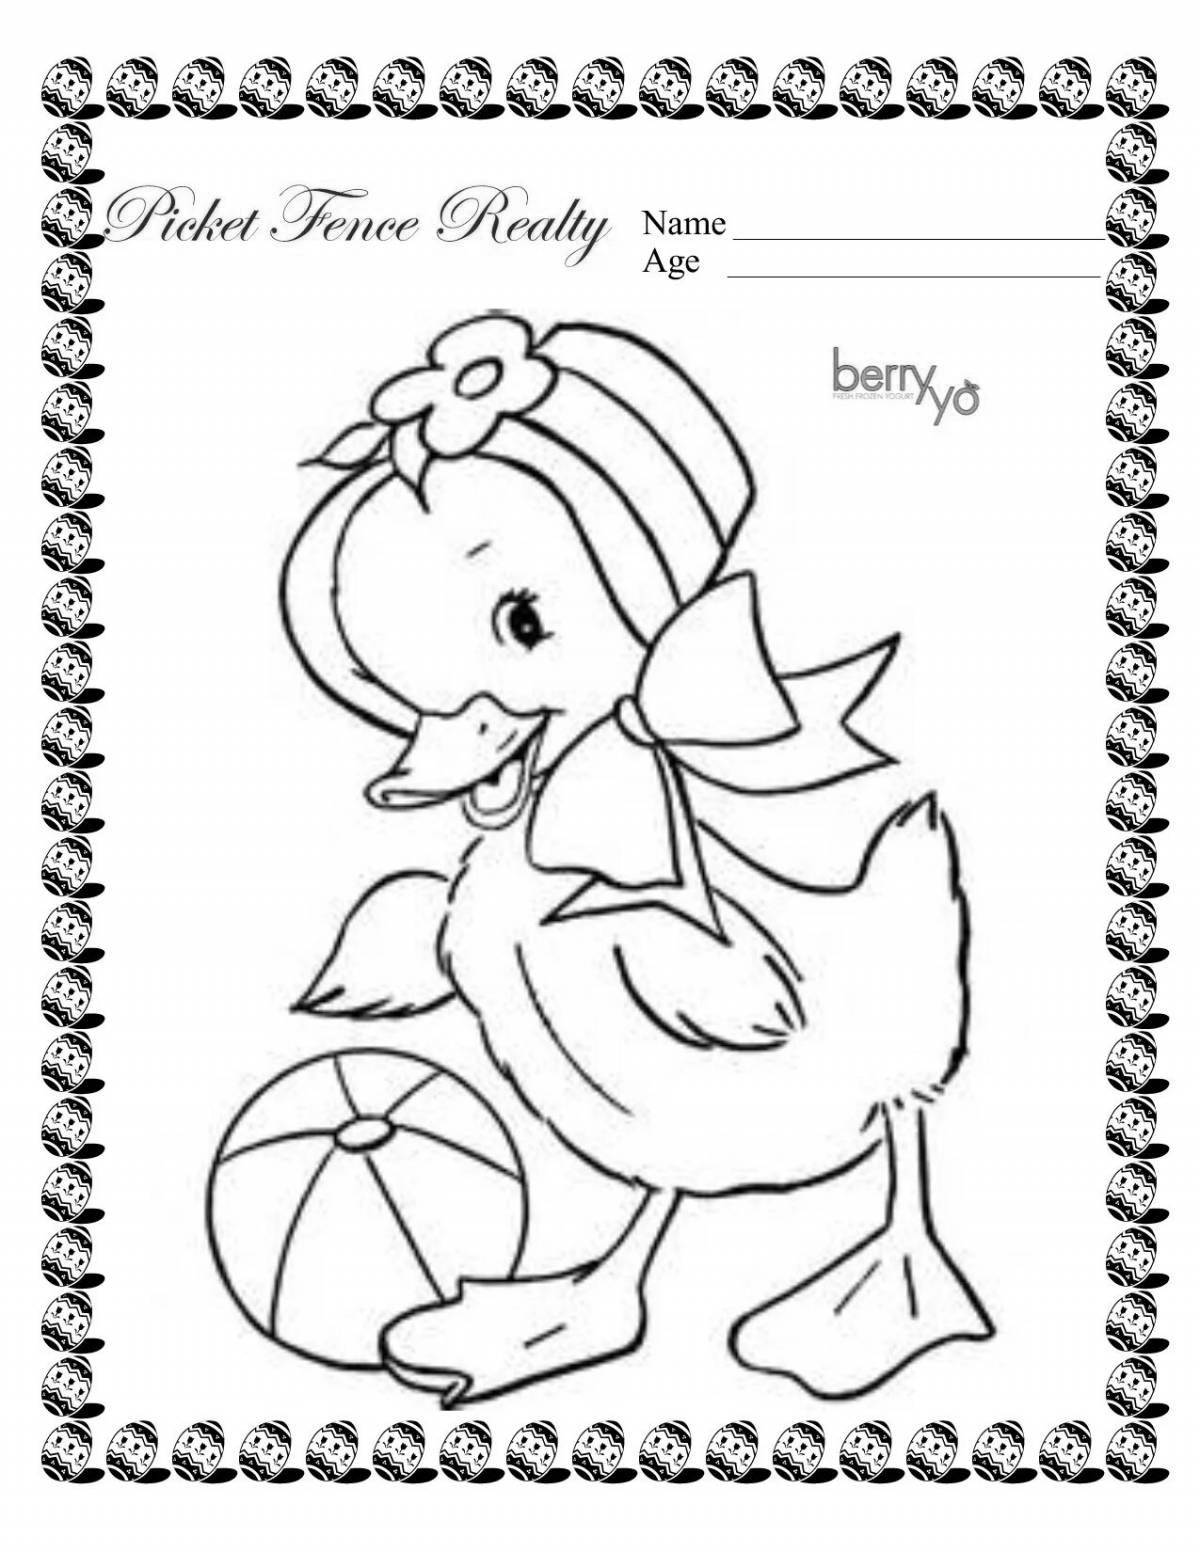 Coloring page fluttering chick and duckling